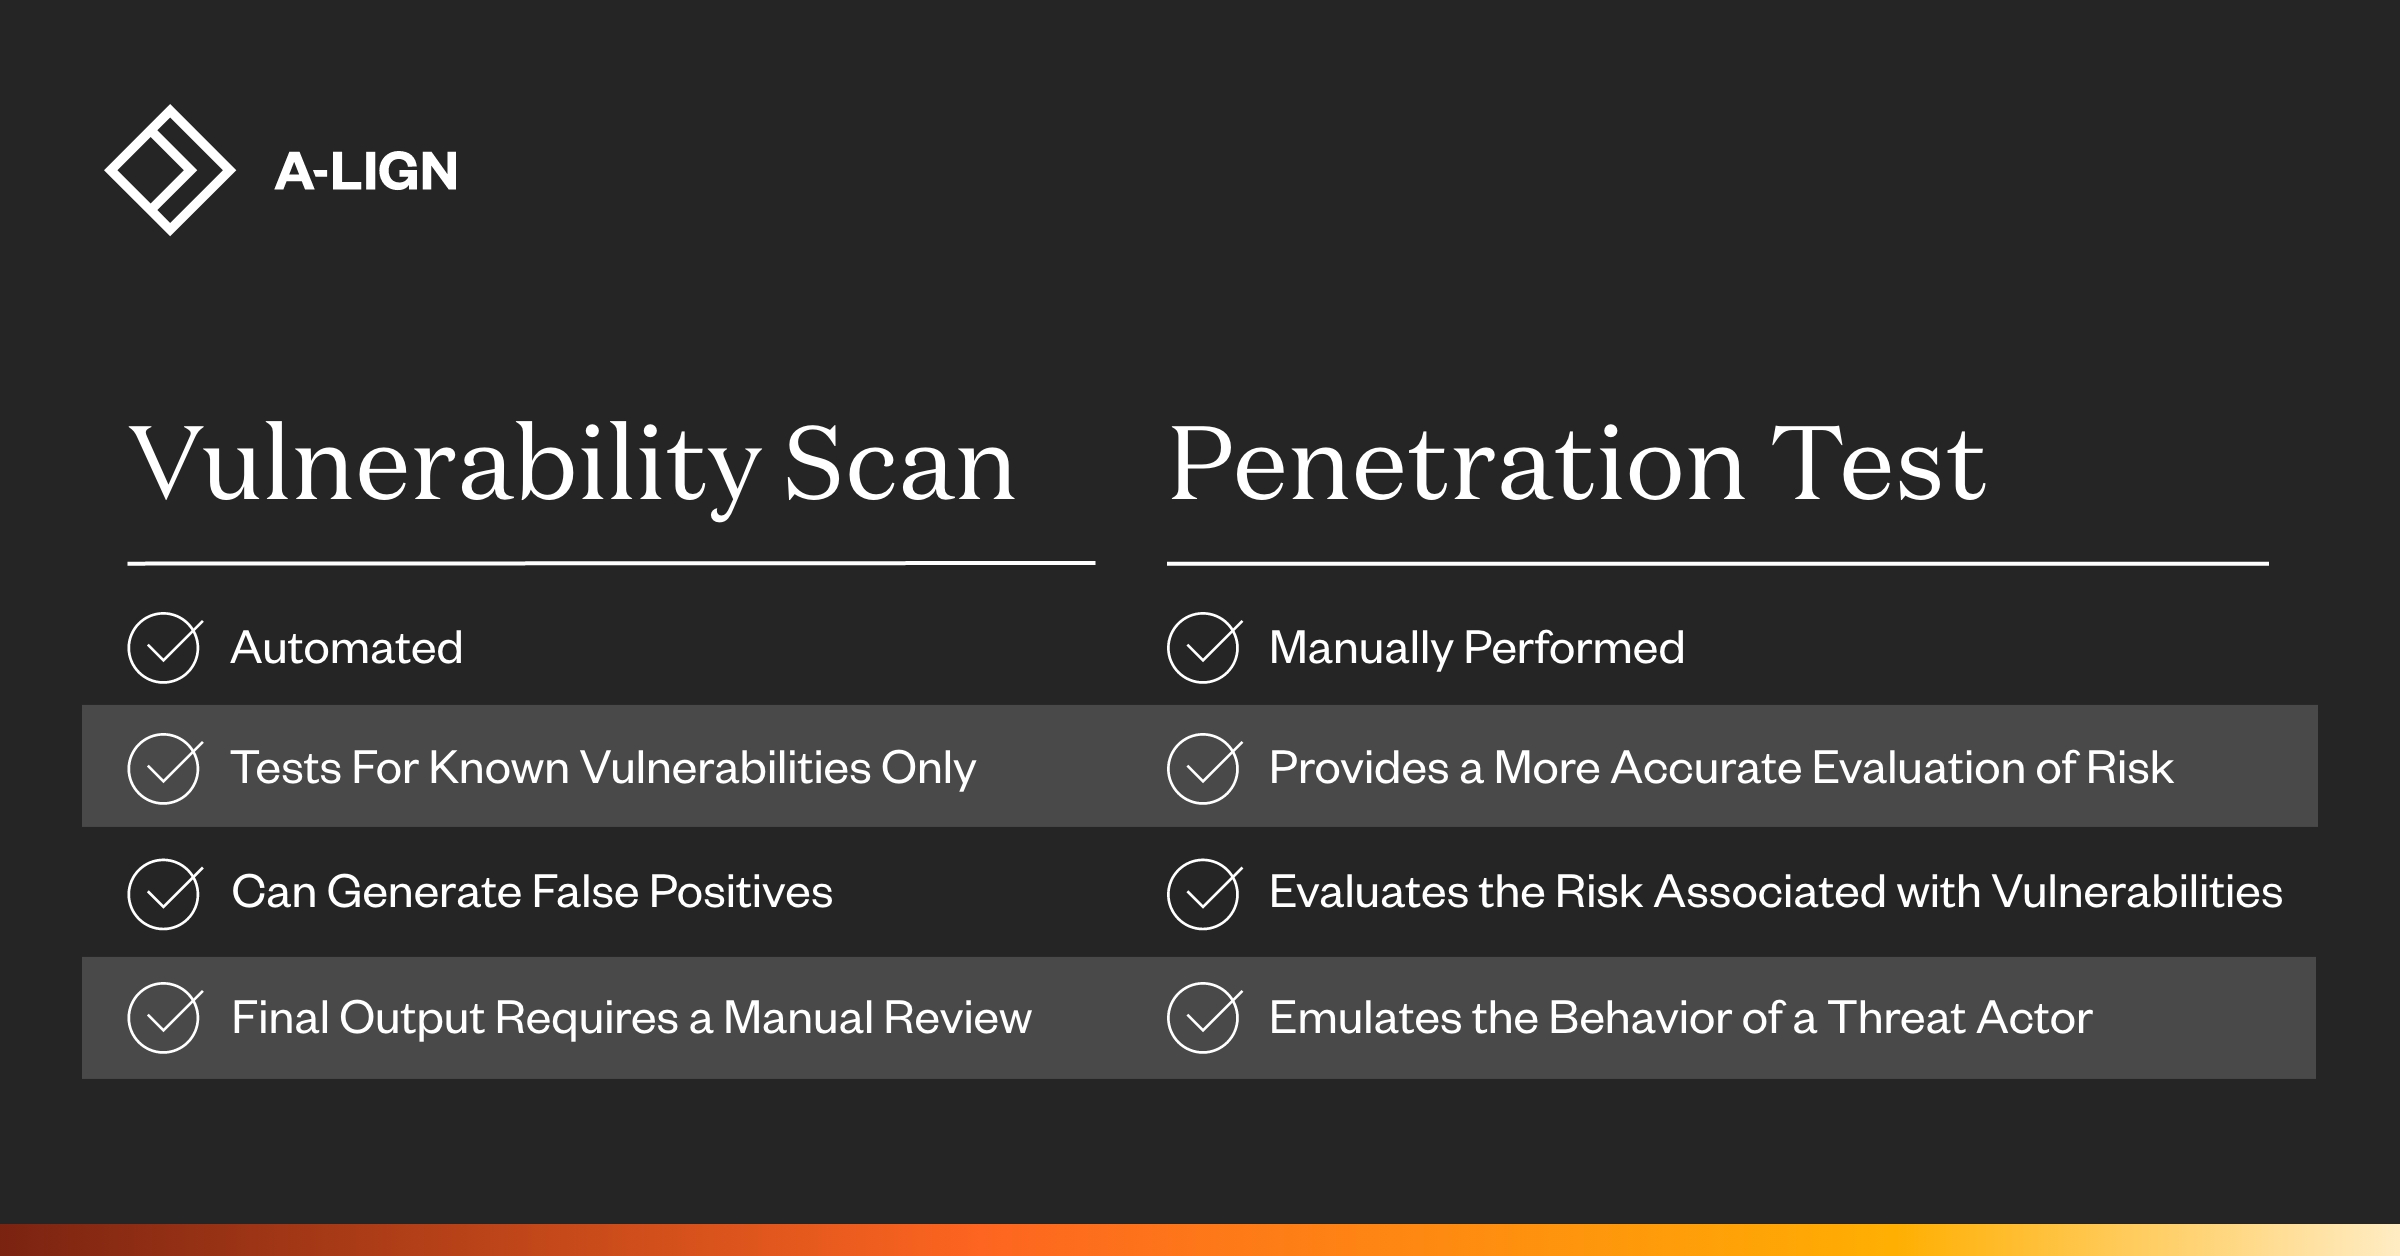 Is vulnerability scanning accurate?